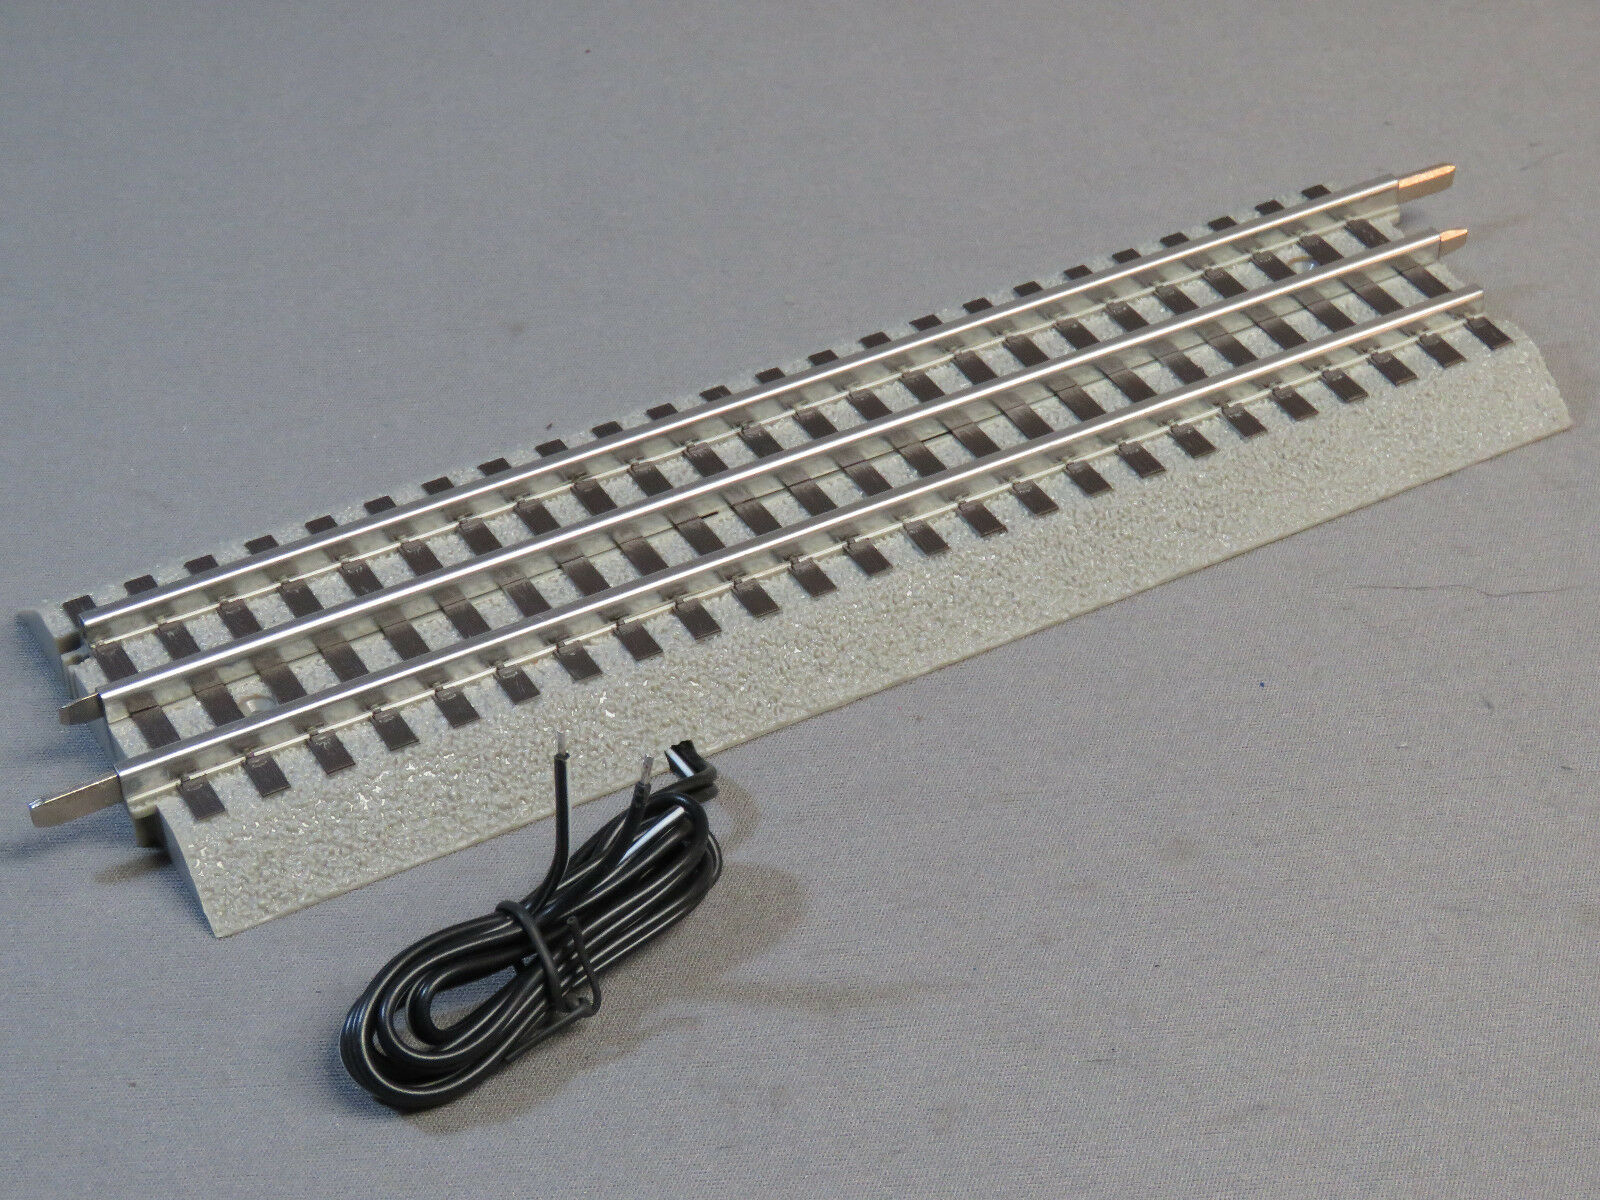 Lionel Fastrack Terminal Train Track Connection Wires Fast Fasttrack 6-12016 New